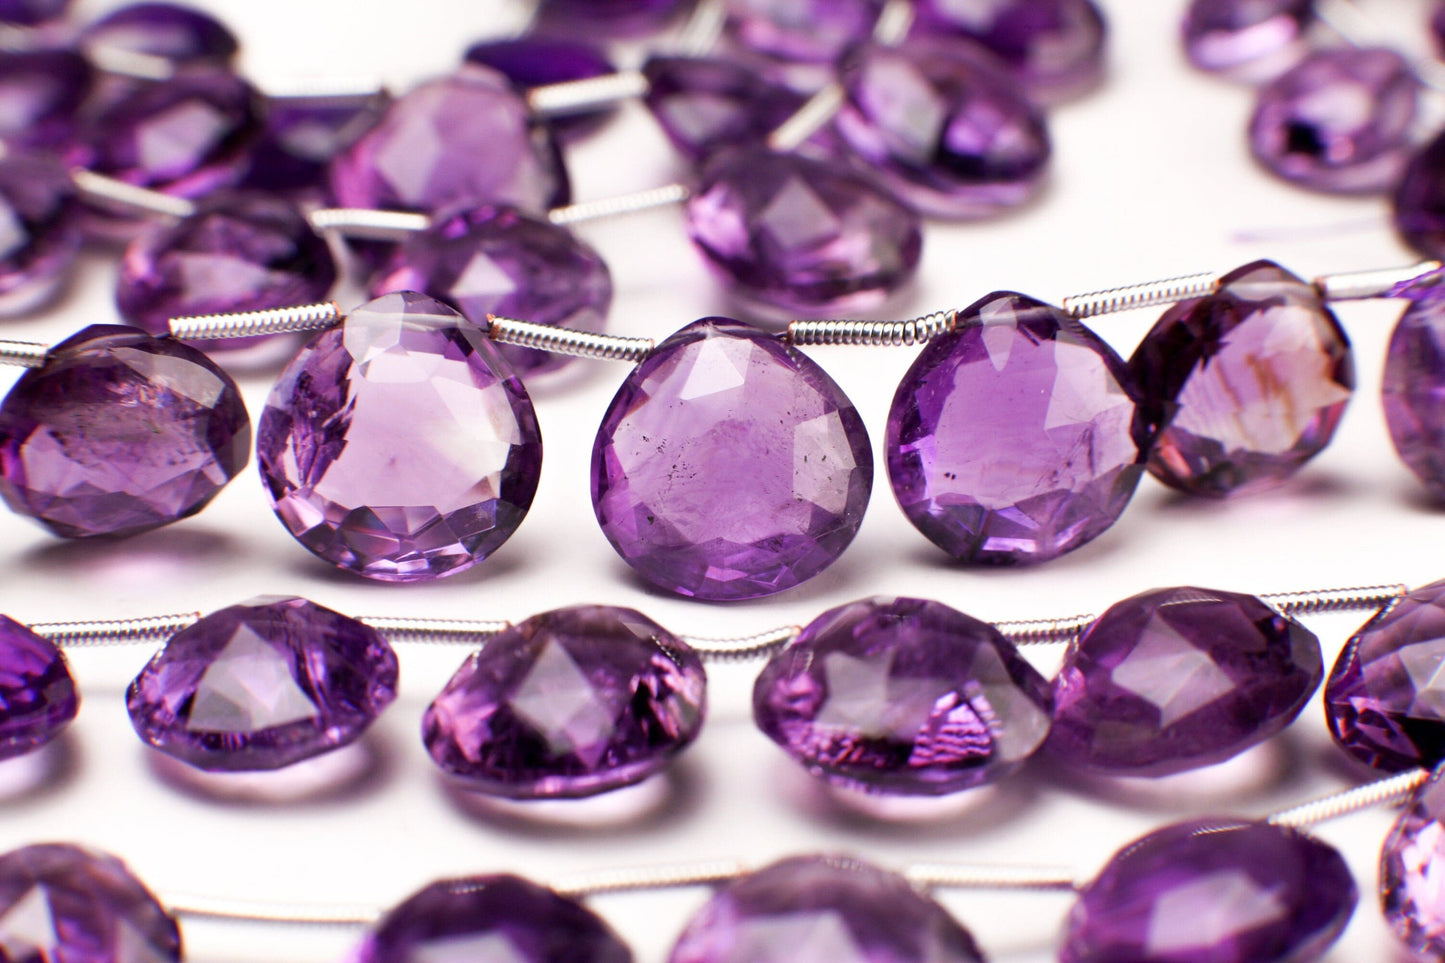 Genuine Amethyst cut Faceted AAA clear gem quality Briolette, Graduated Faceted Heart Teardrop 10.5-14mm Amethyst drops.